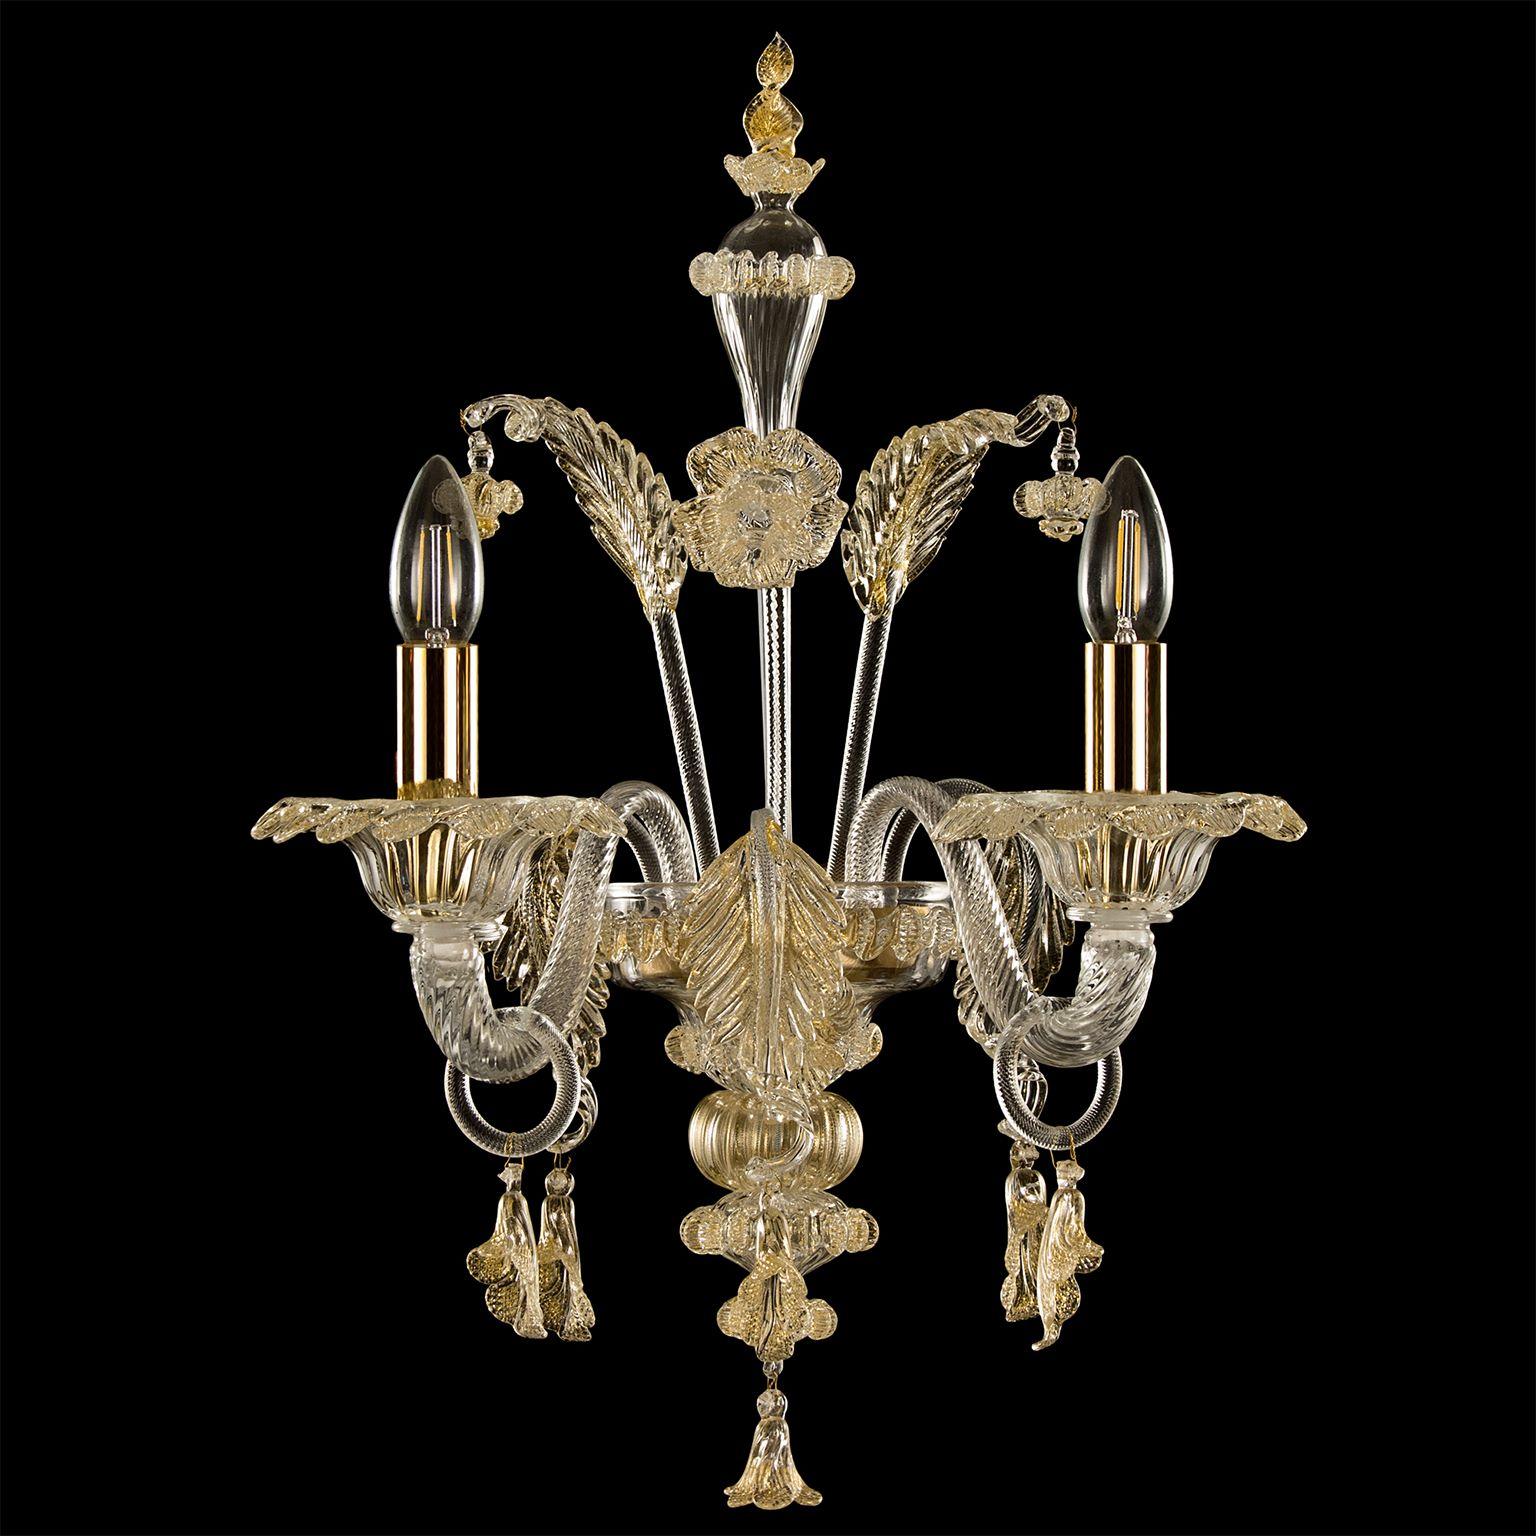 Toffee sconce 2 arms clear and golden leaf Murano glass by Multiforme.

The artistic glass collection Toffee is an elegant and delicate lighting work. The structure is a combination of well-proportioned volumes that creates a refined sconce.
It